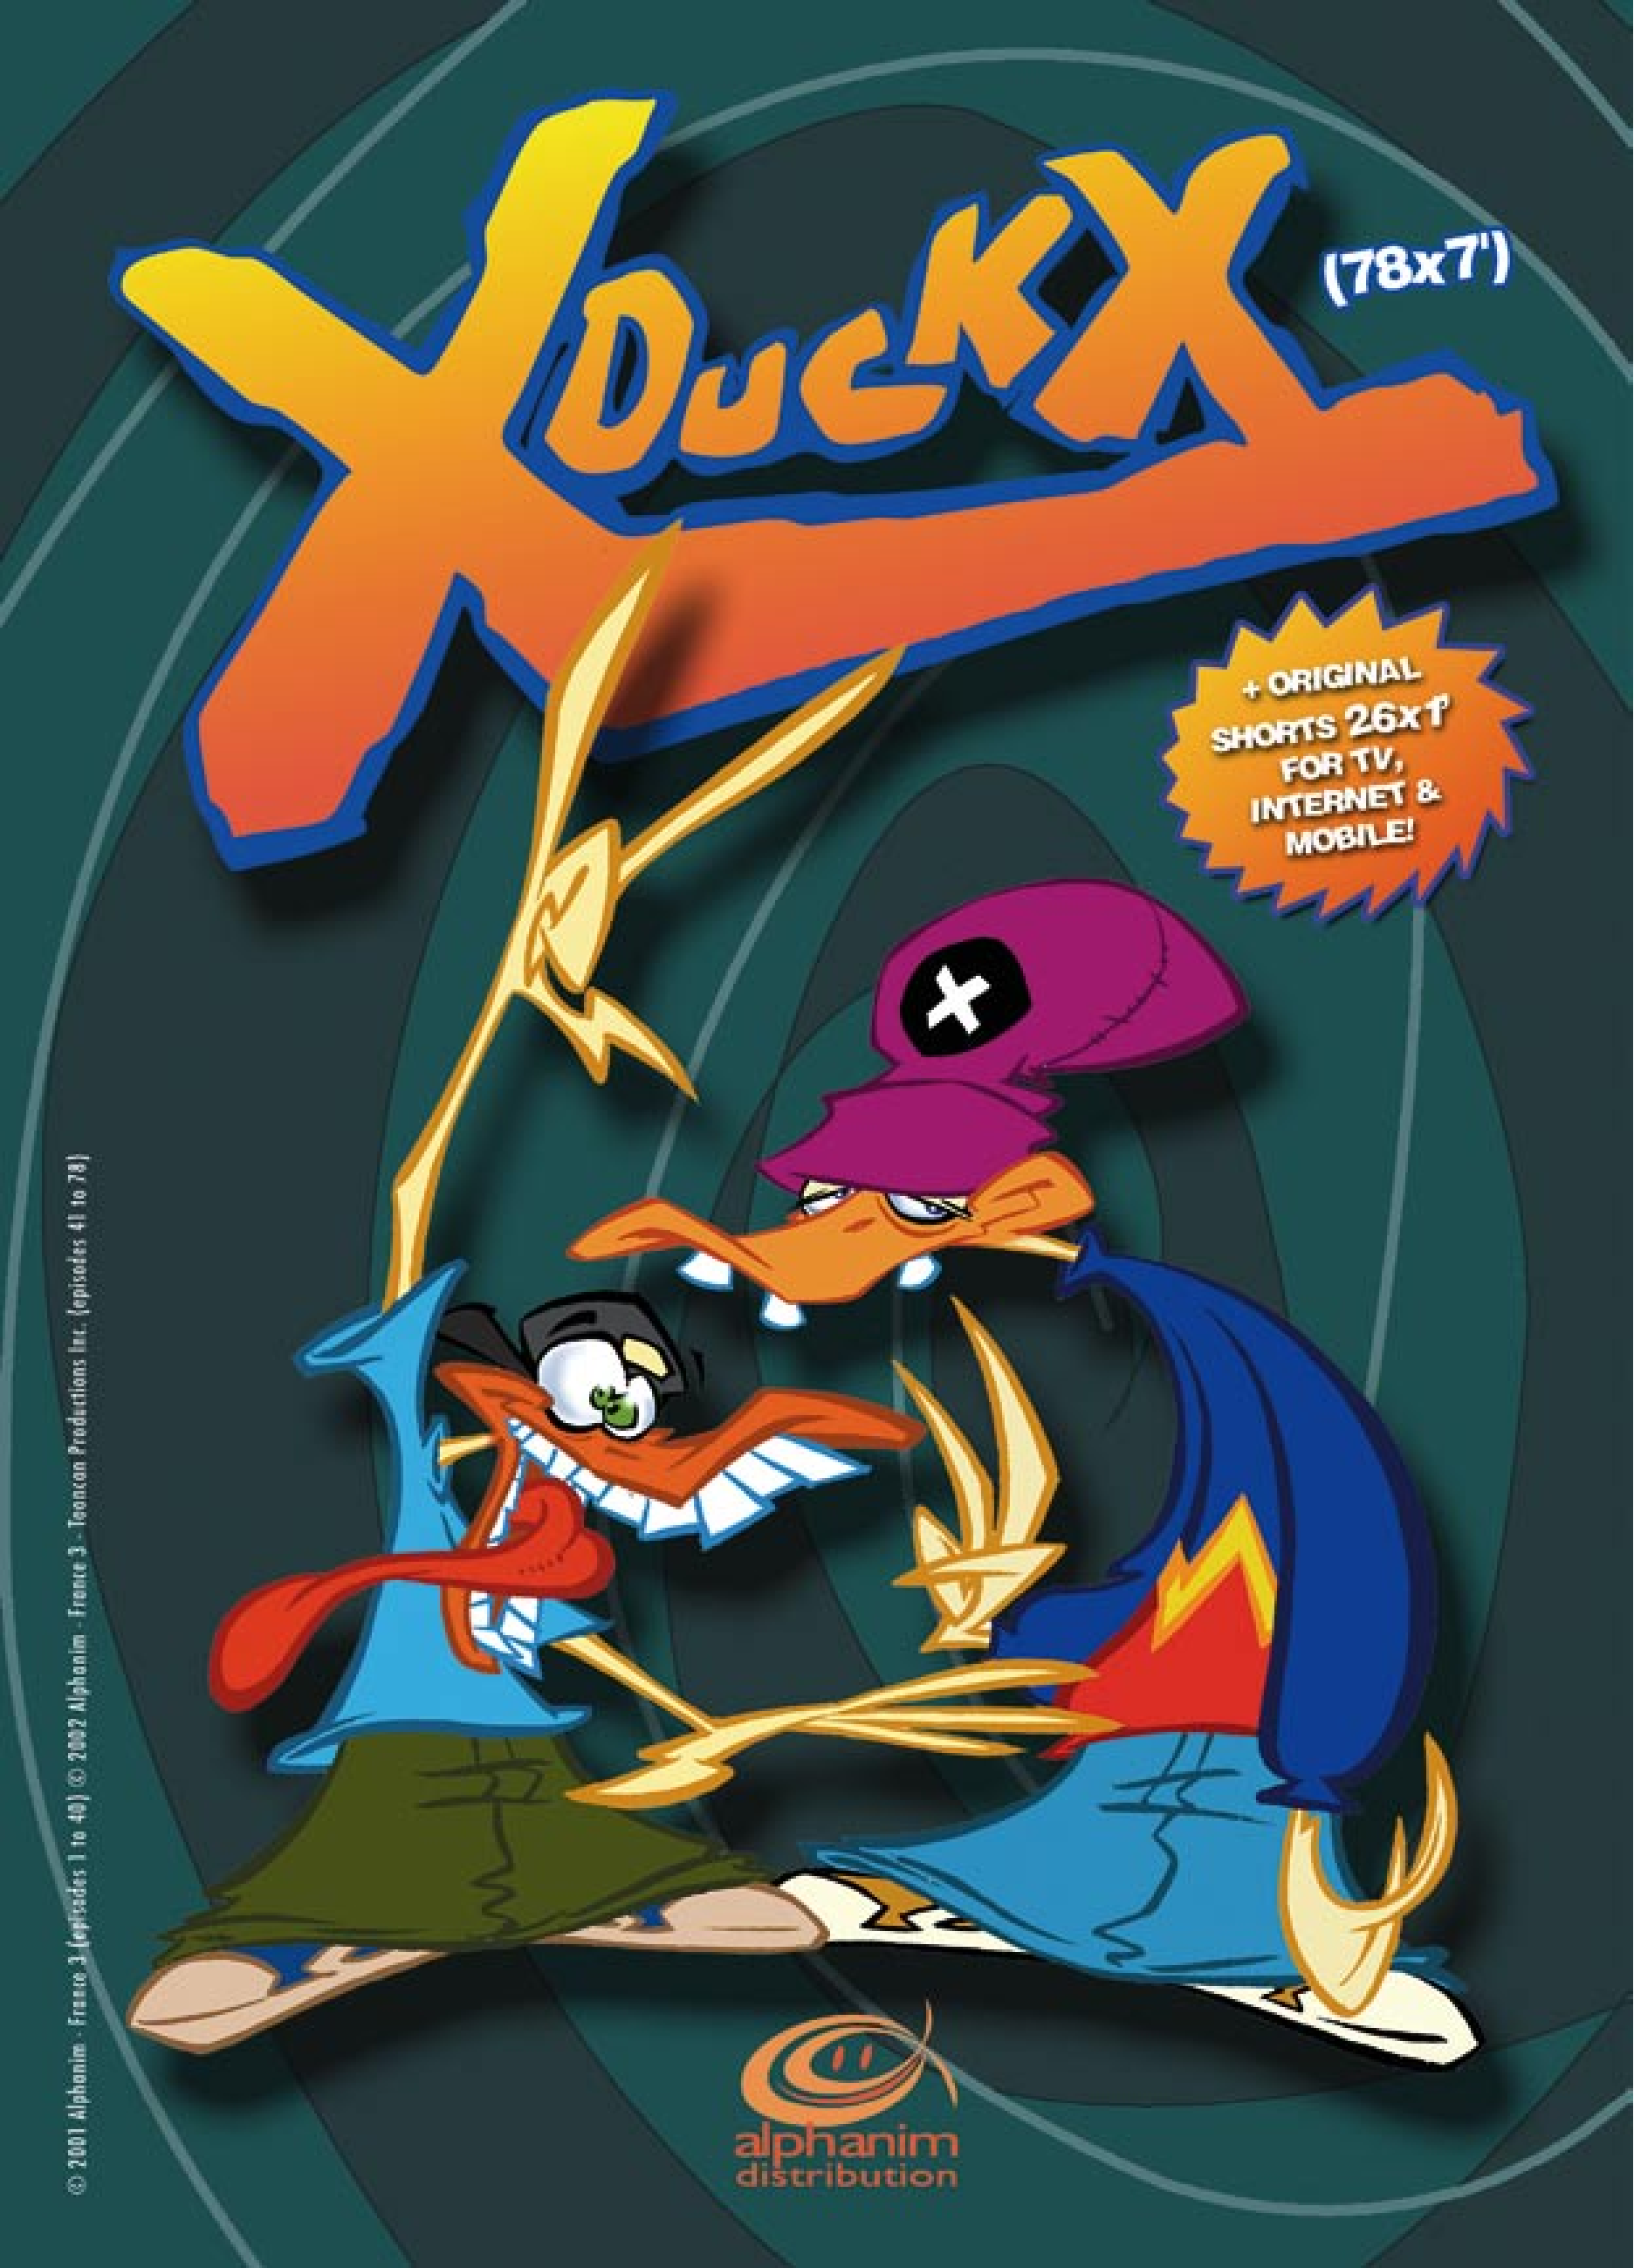 Flyer xducks 01-1.png